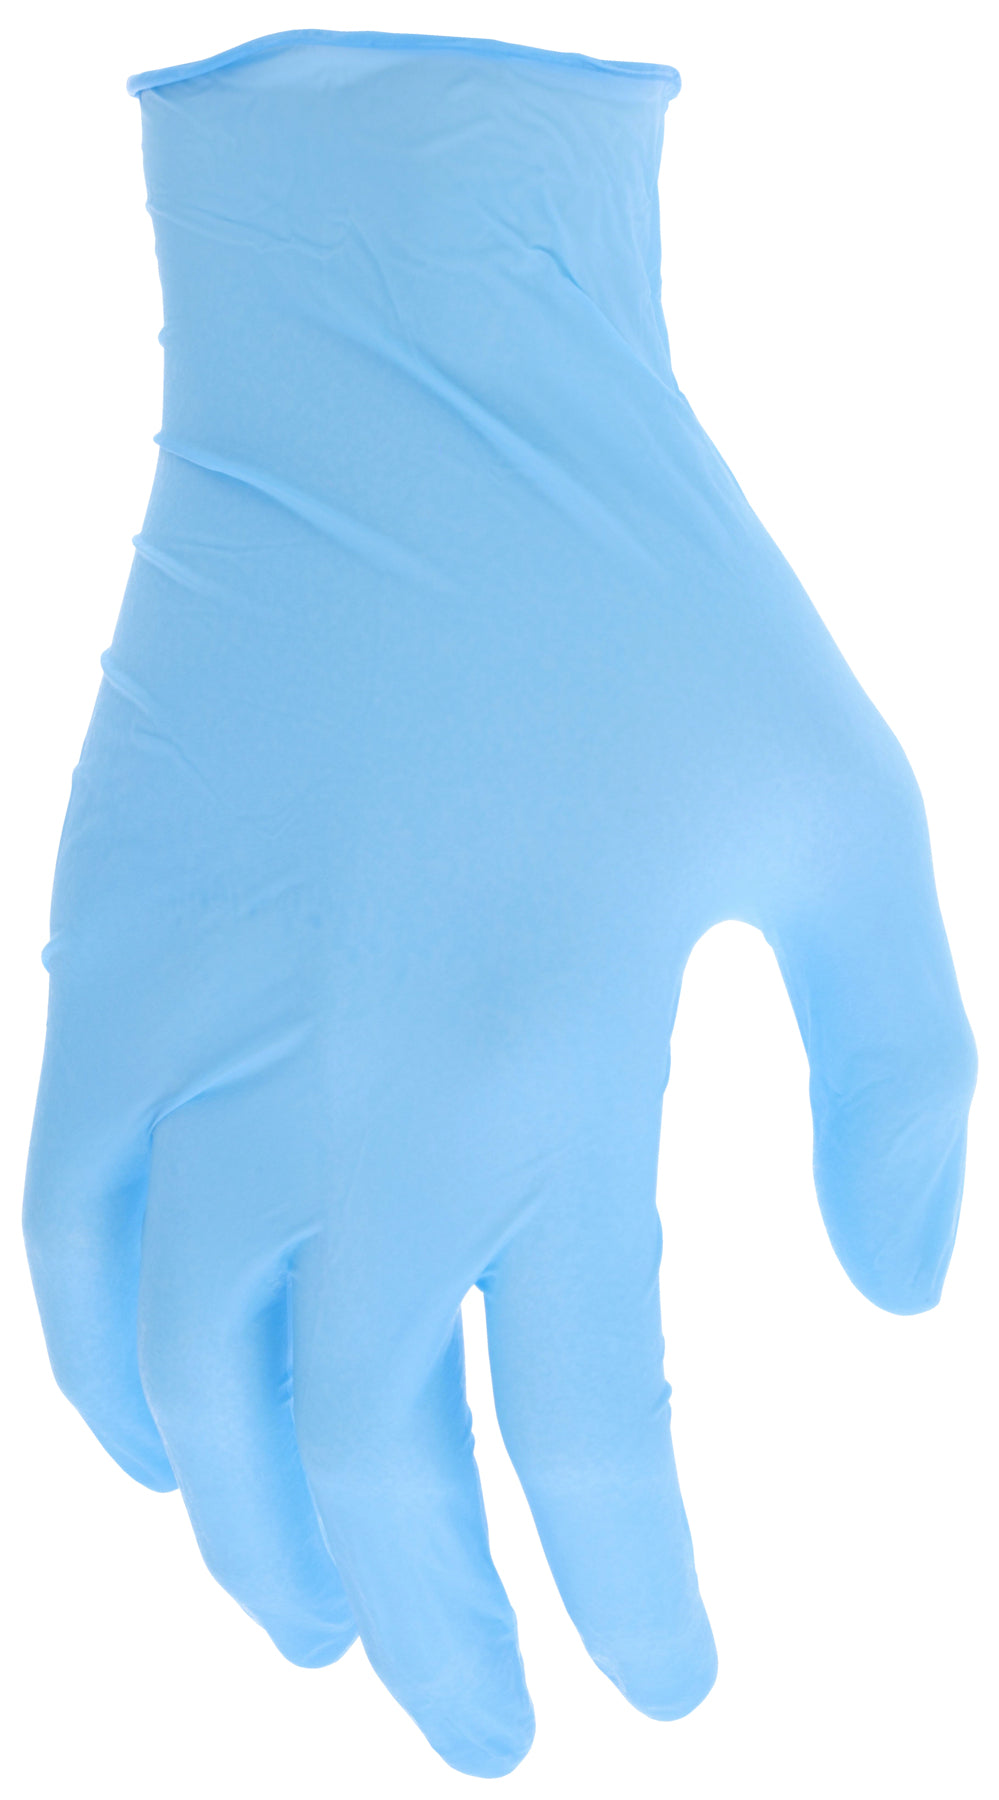 Generic 100pcs - Disposable Nylon Hand Gloves Protect Your Hands Always